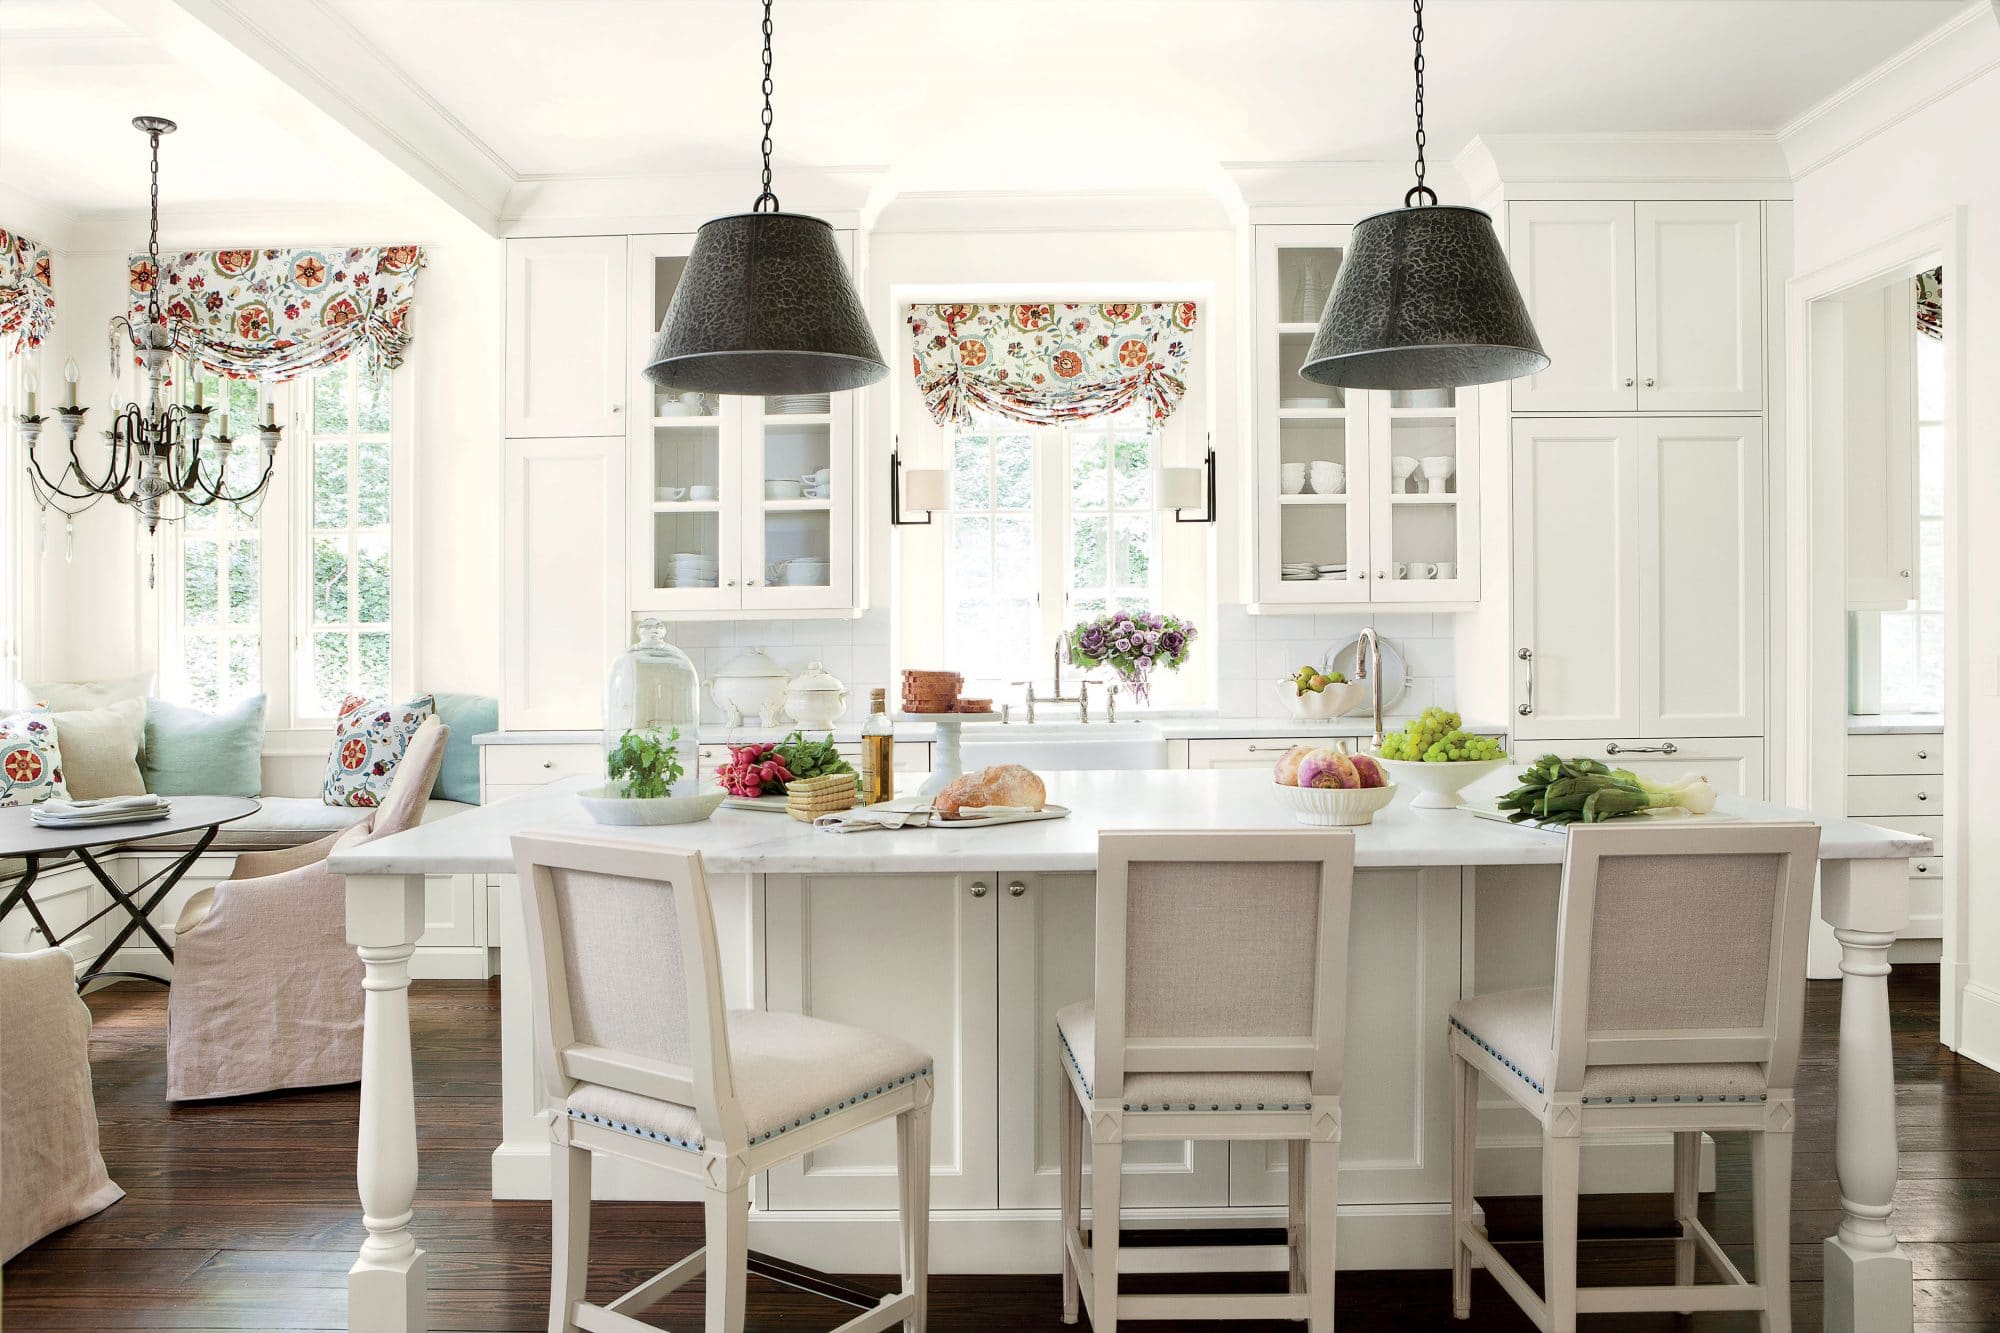 Kitchen Inspiration: The Ultimate 31 Post Round Up of Timeless Kitchen Ideas